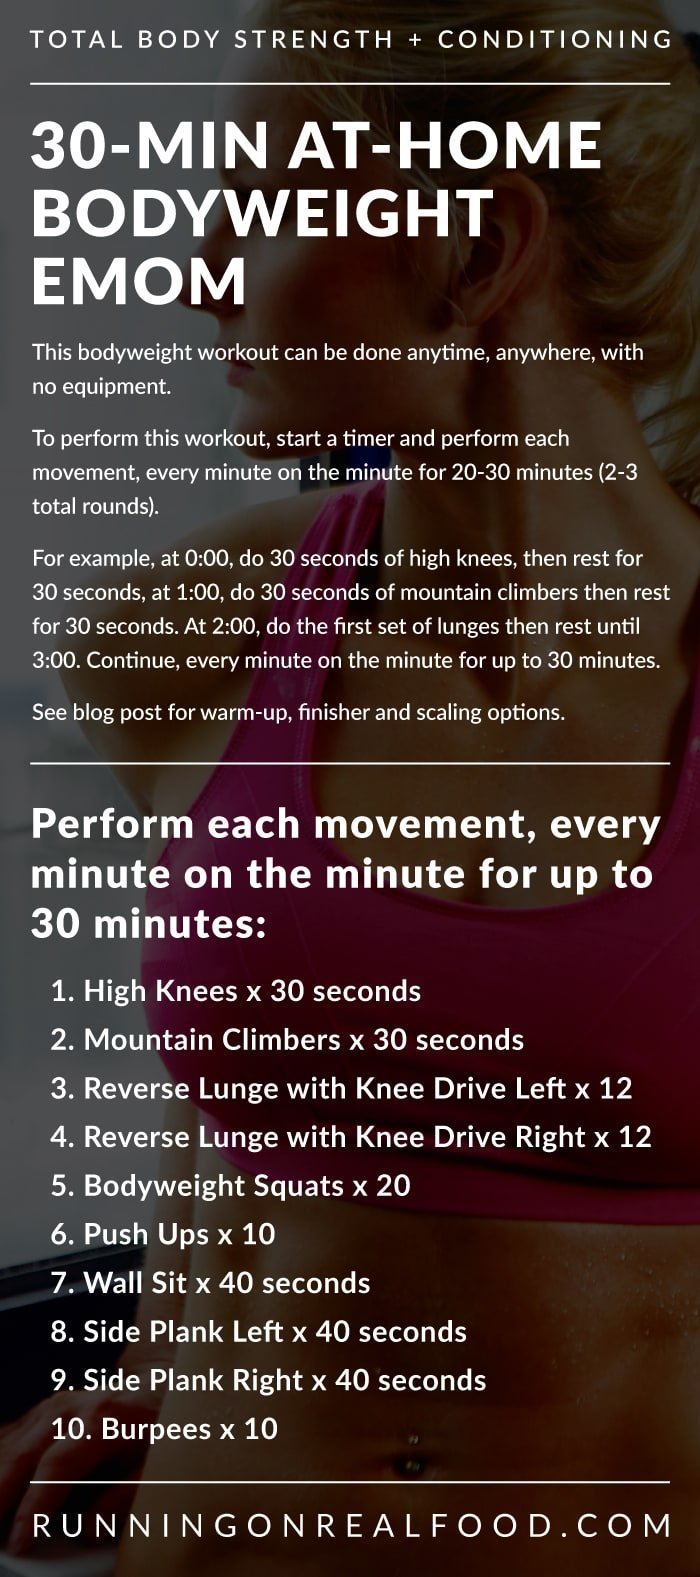 Text instructions for a 30-minute at-home bodyweight EMOM workout.